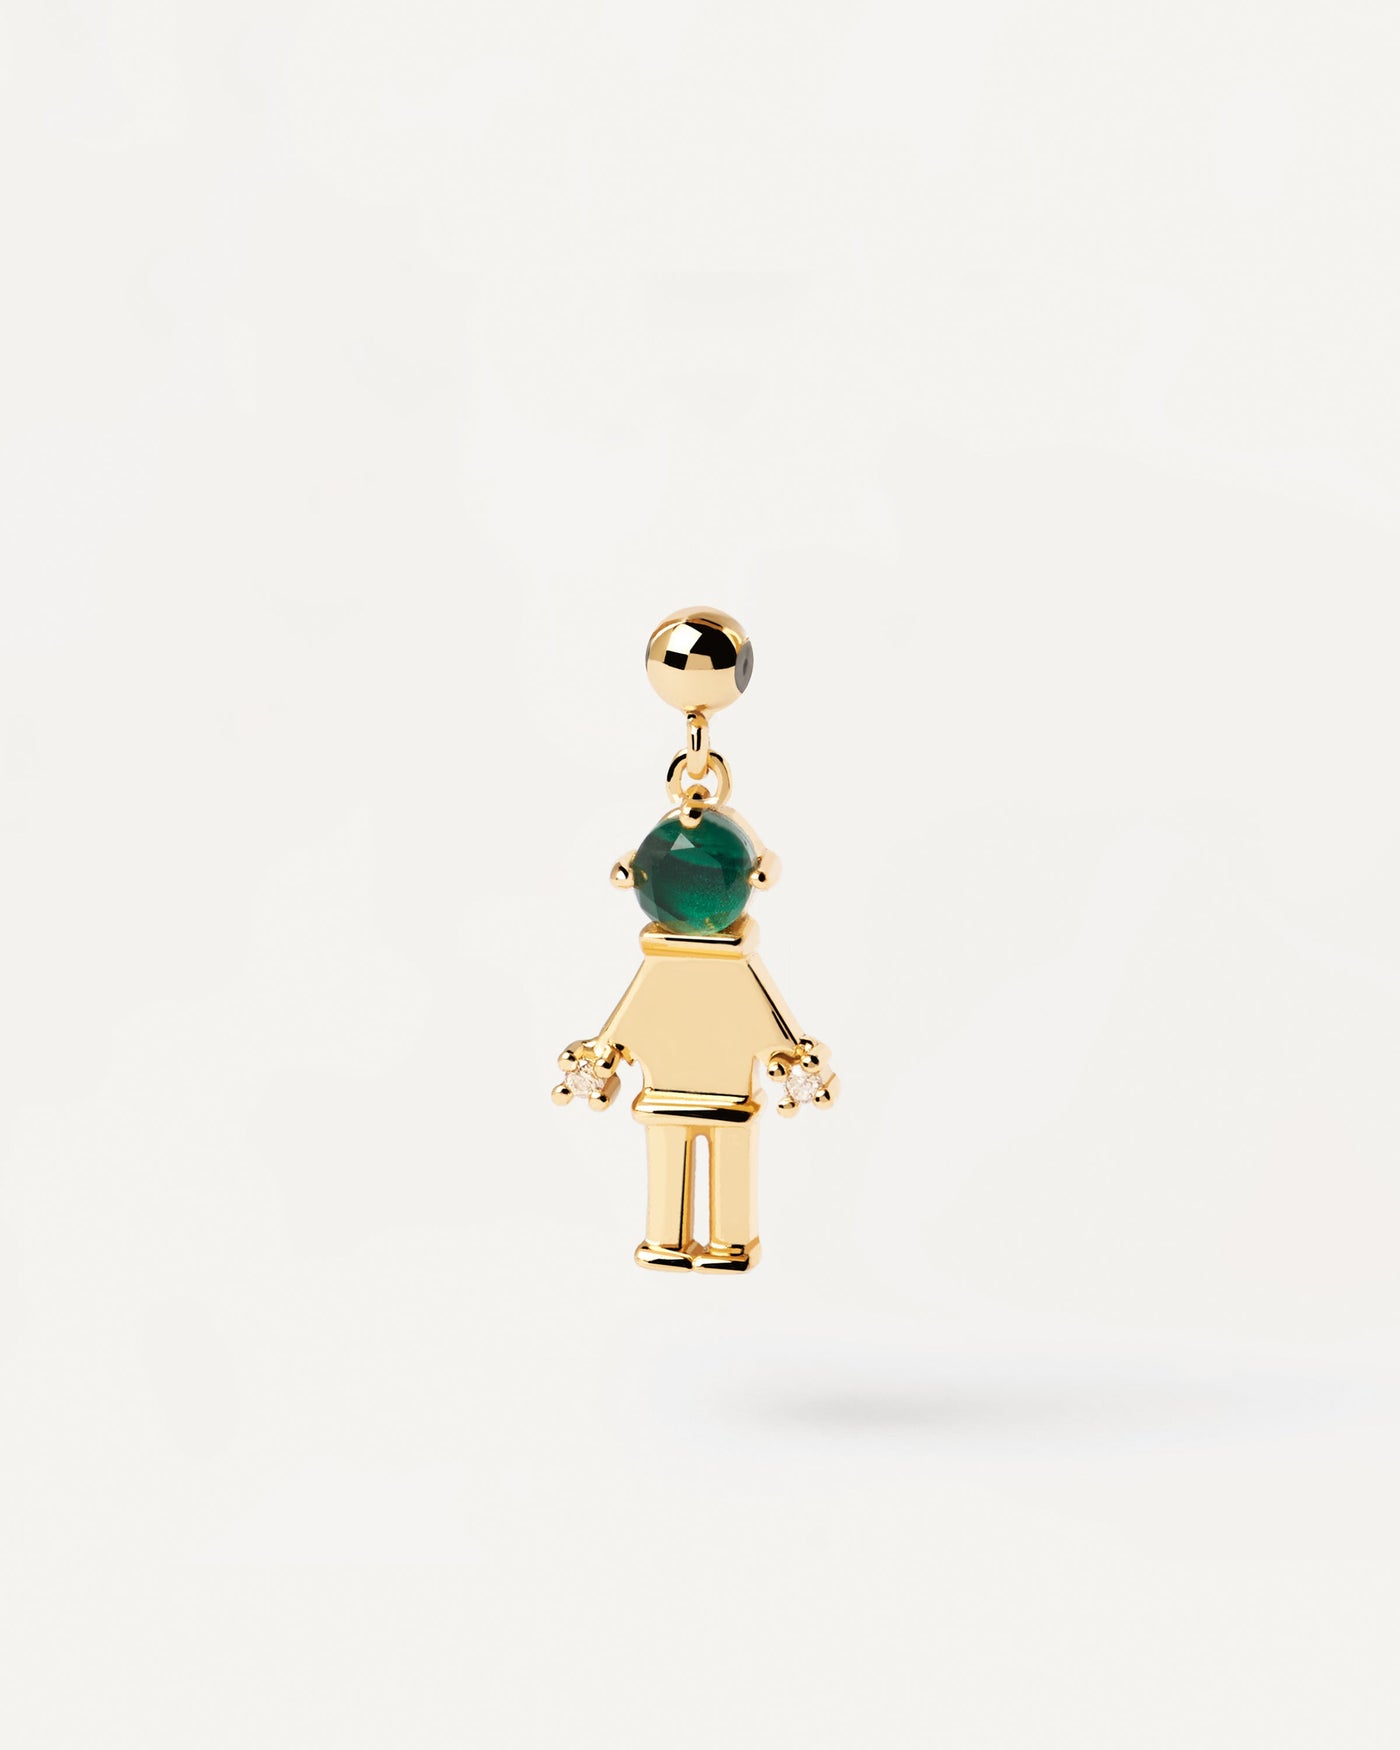 2023 Selection | Girl & Boy Charm. Gold-plated silver human form for Charm necklace or bracelet with green gemstone. Get the latest arrival from PDPAOLA. Place your order safely and get this Best Seller. Free Shipping.